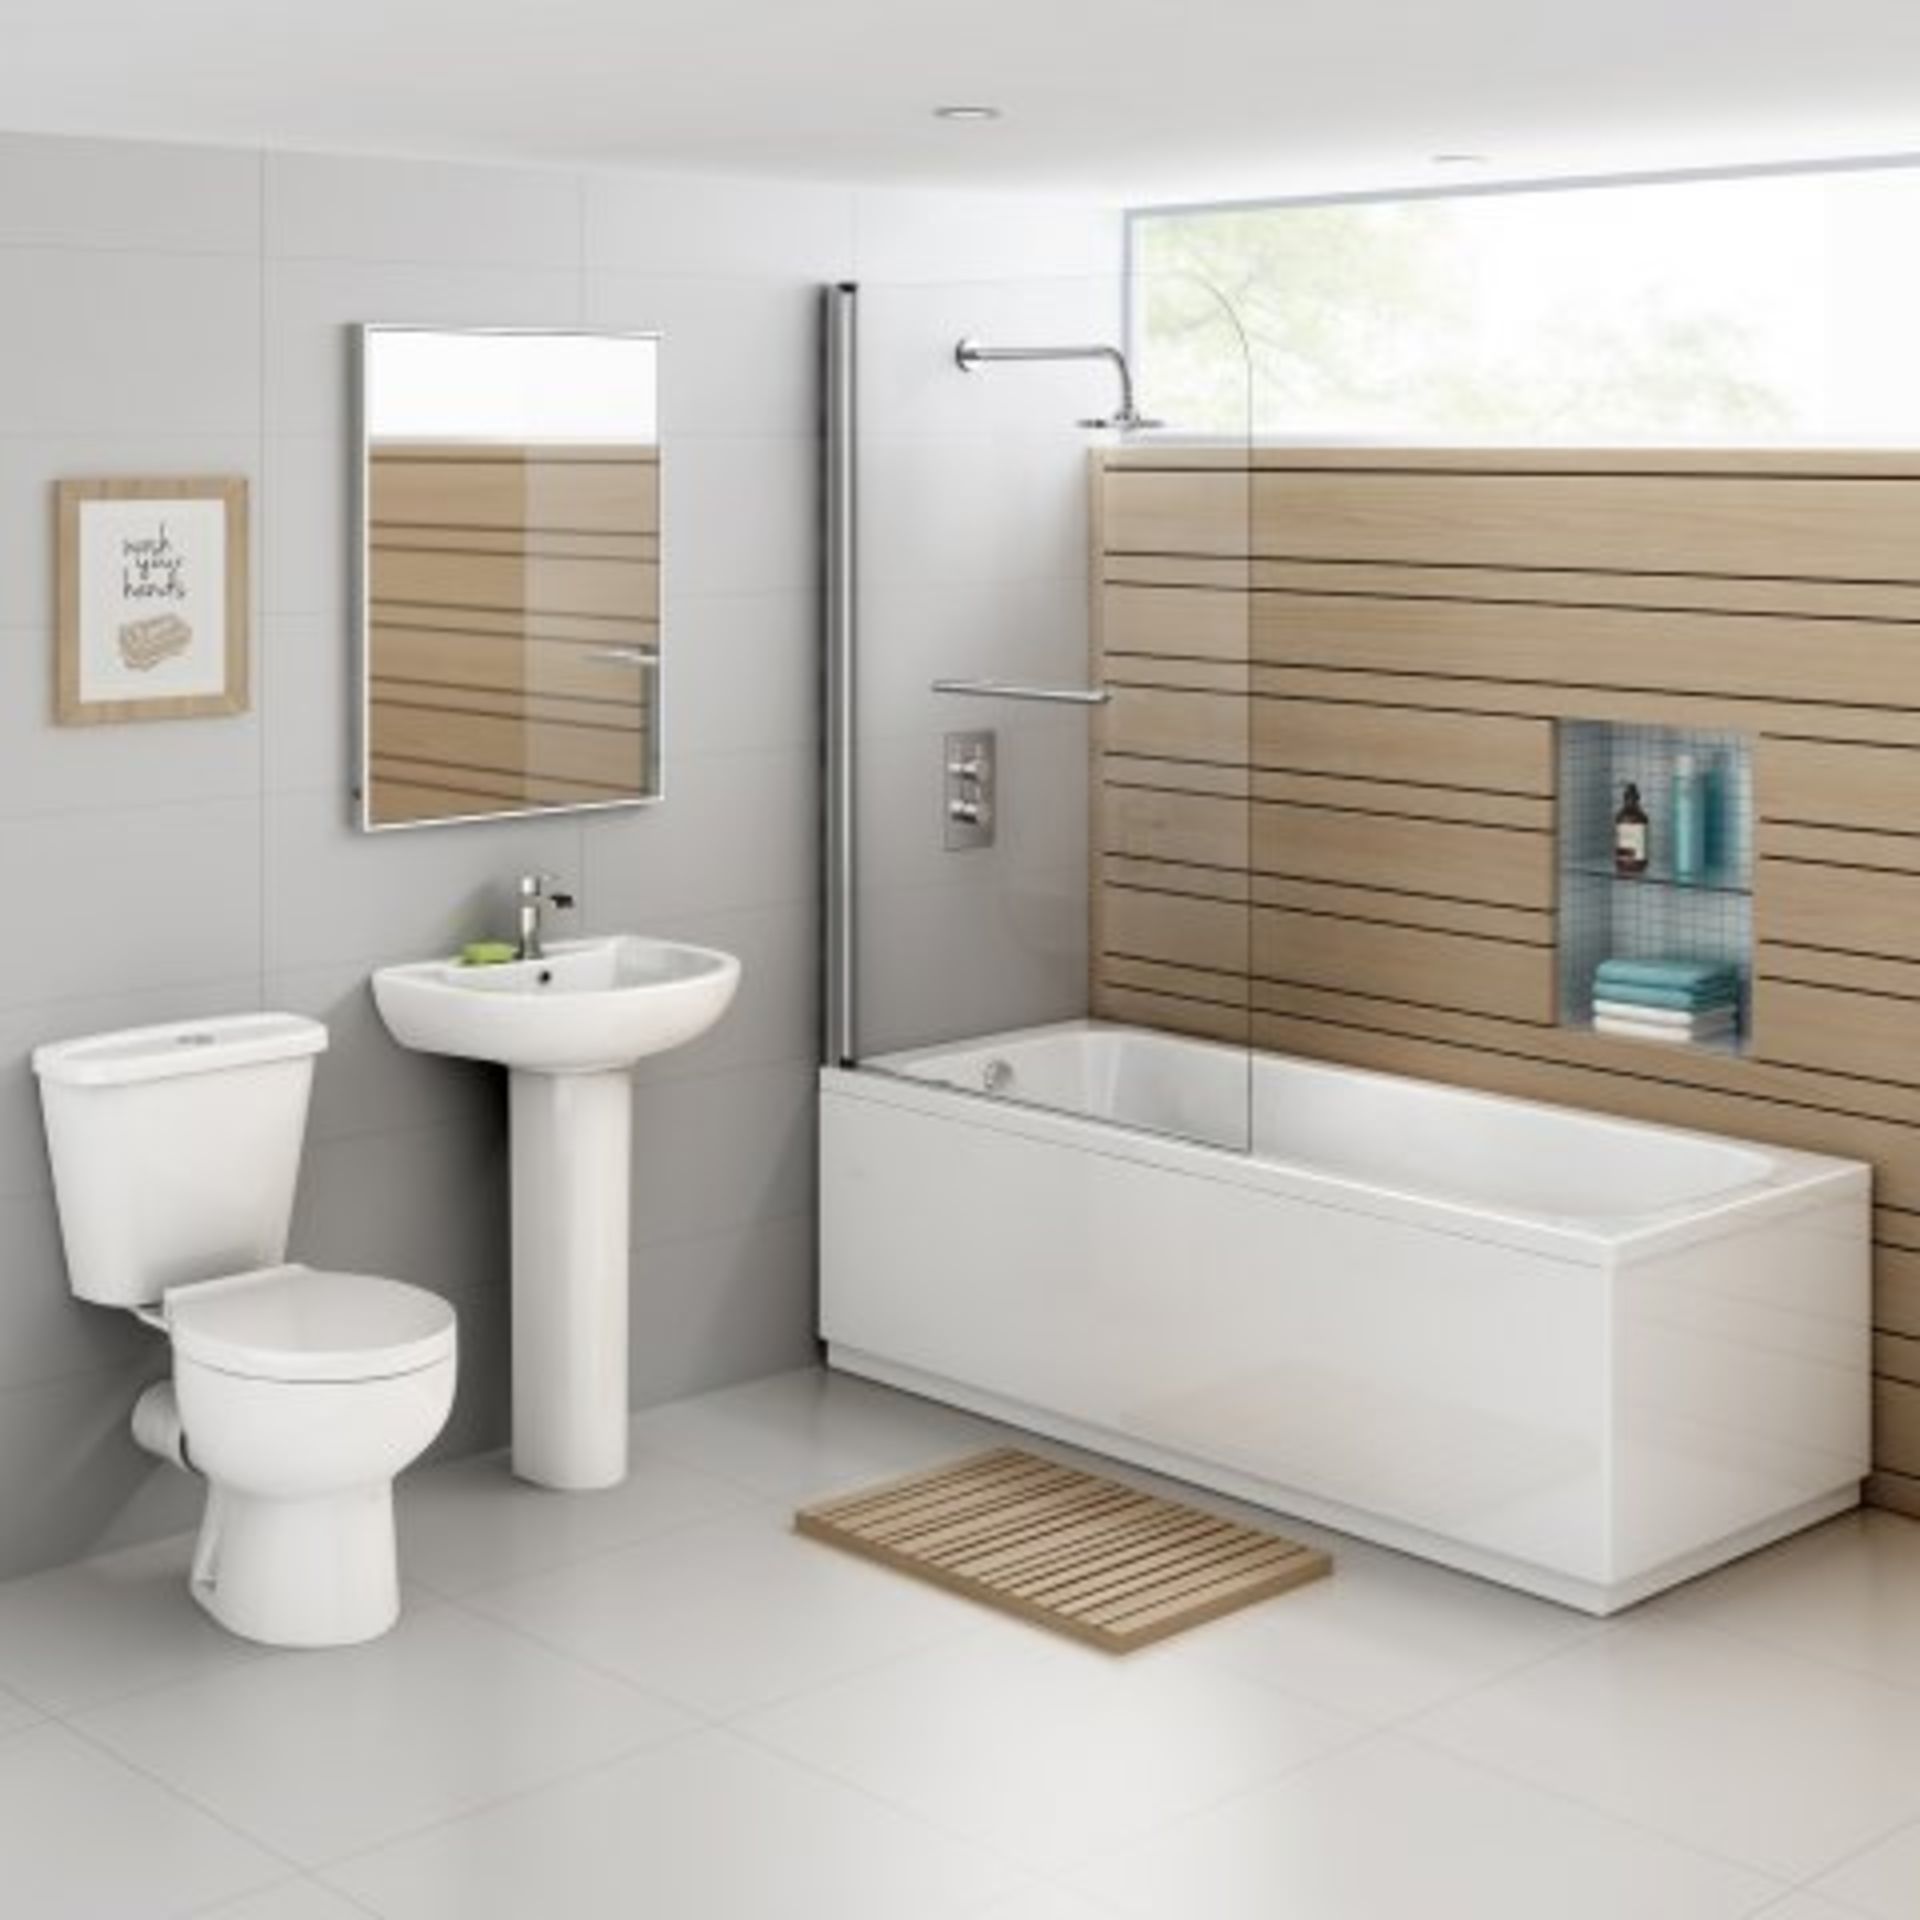 (O110) 1000mm - 4mm - Straight Bath Screen & Towel Rail. RRP £174.99. 4mm Tempered Safety Glass - Image 3 of 3